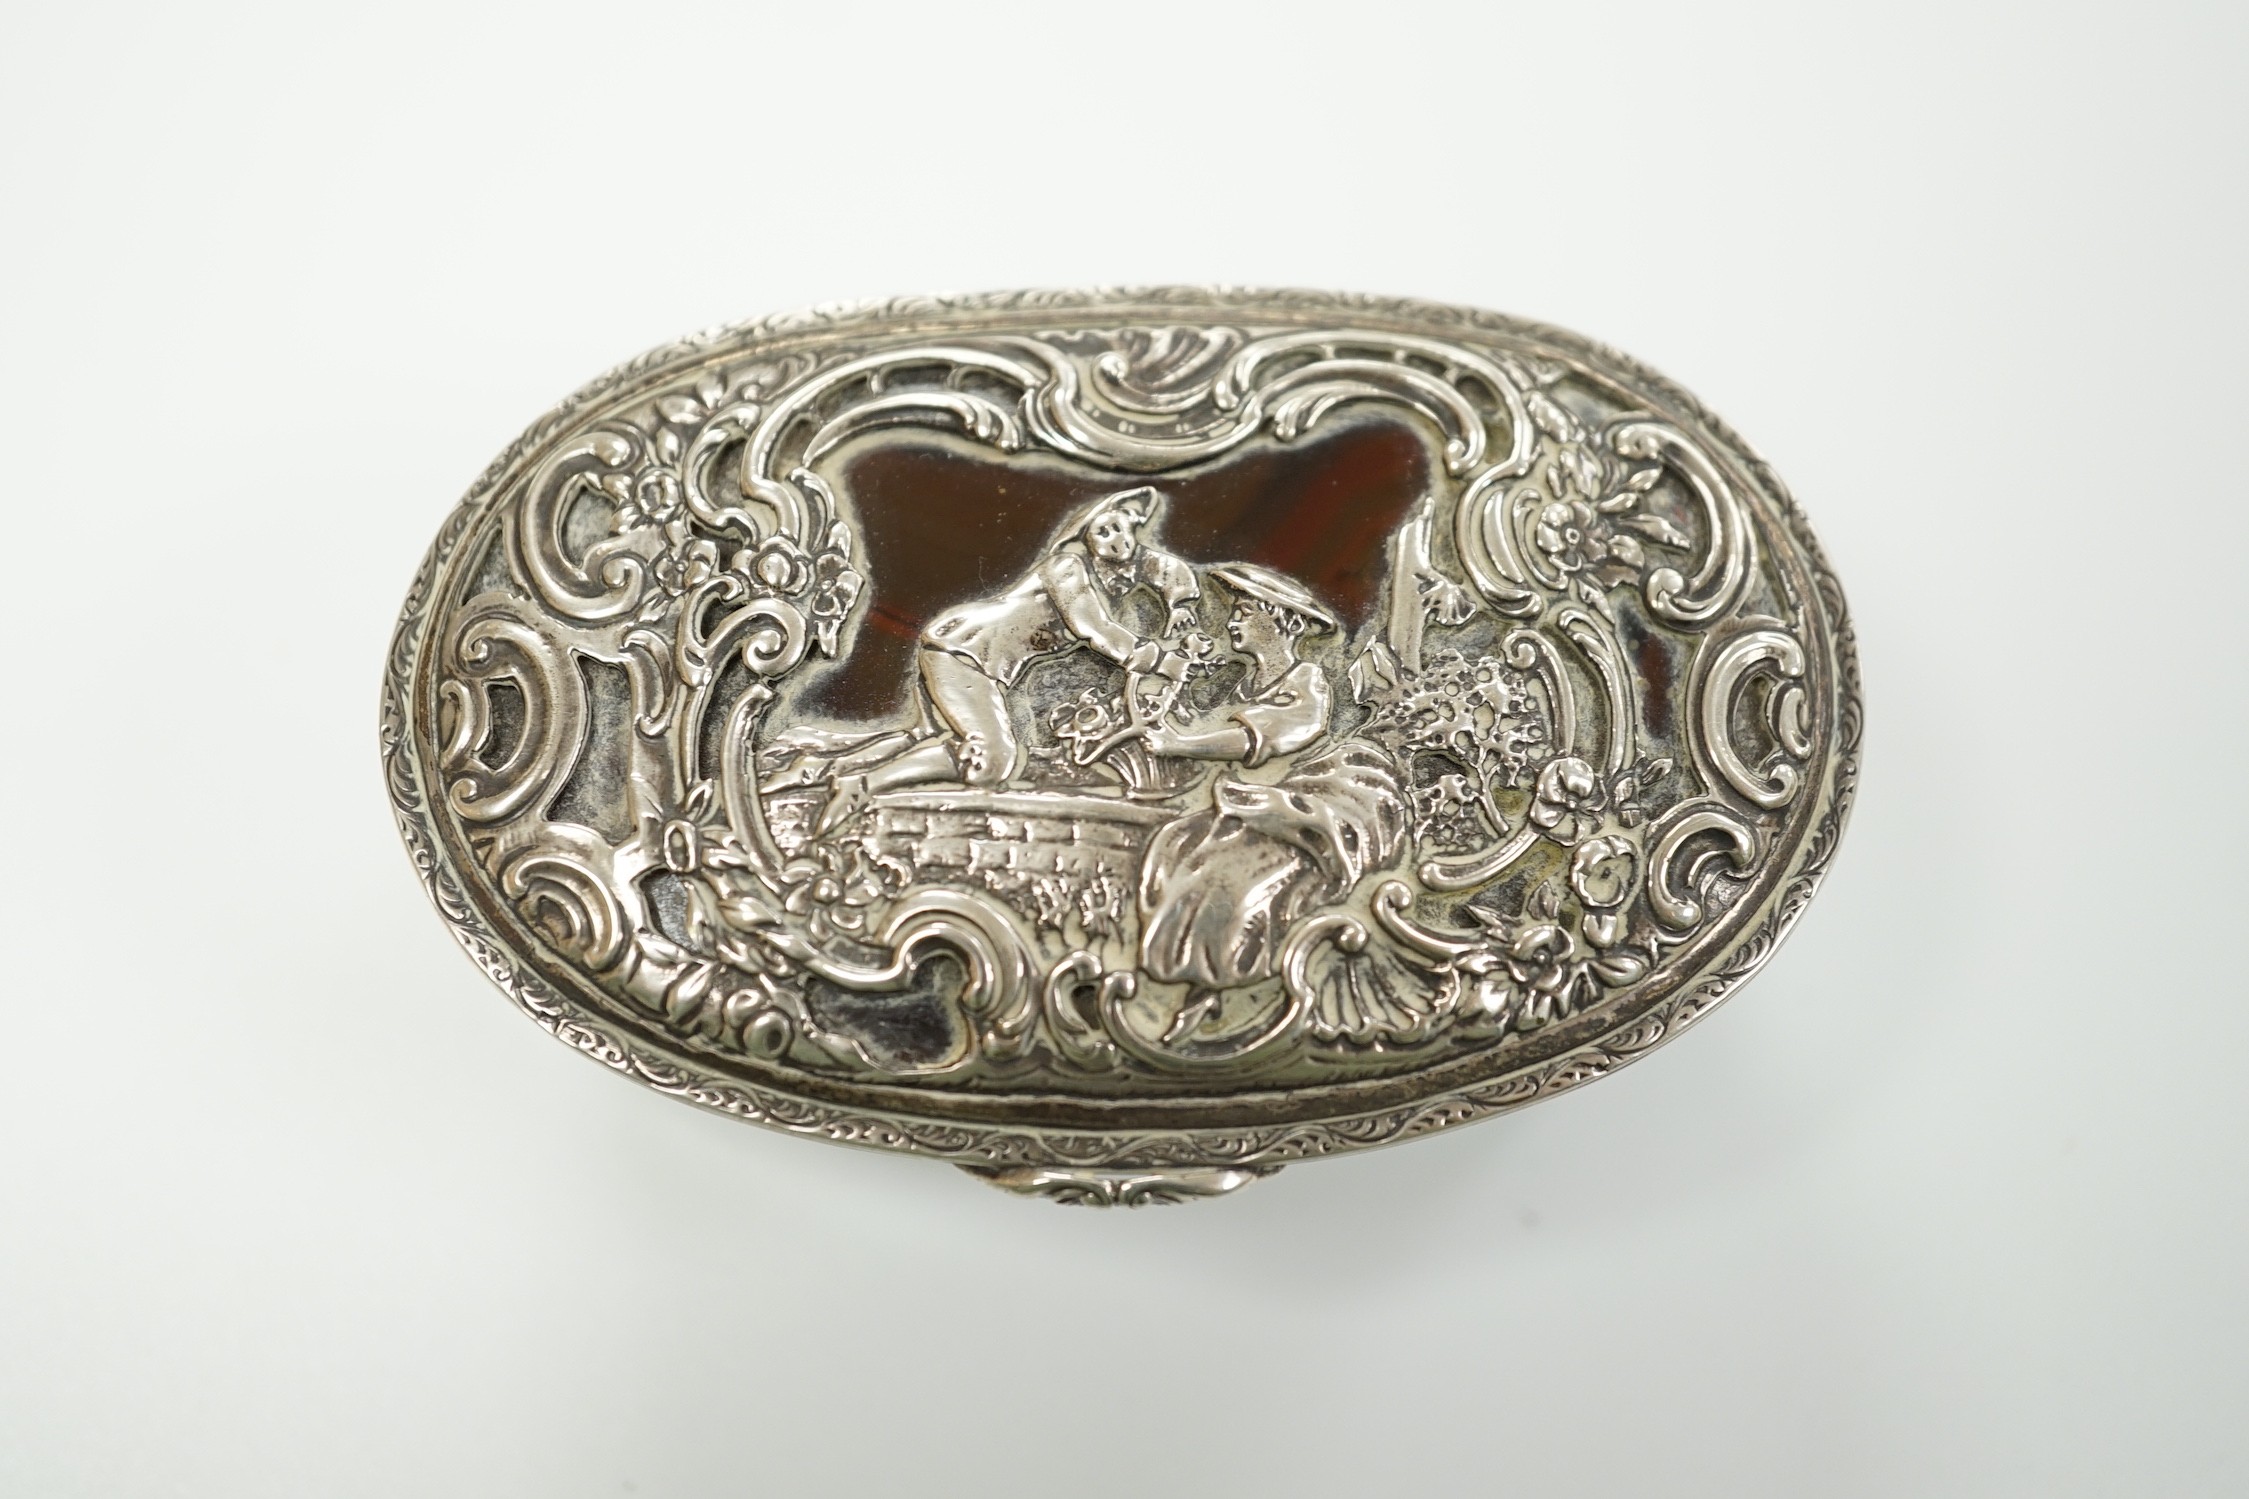 A 19th century continental white metal mounted banded agate oval snuff box, decorated with figures amid scrolls, length 79mm.